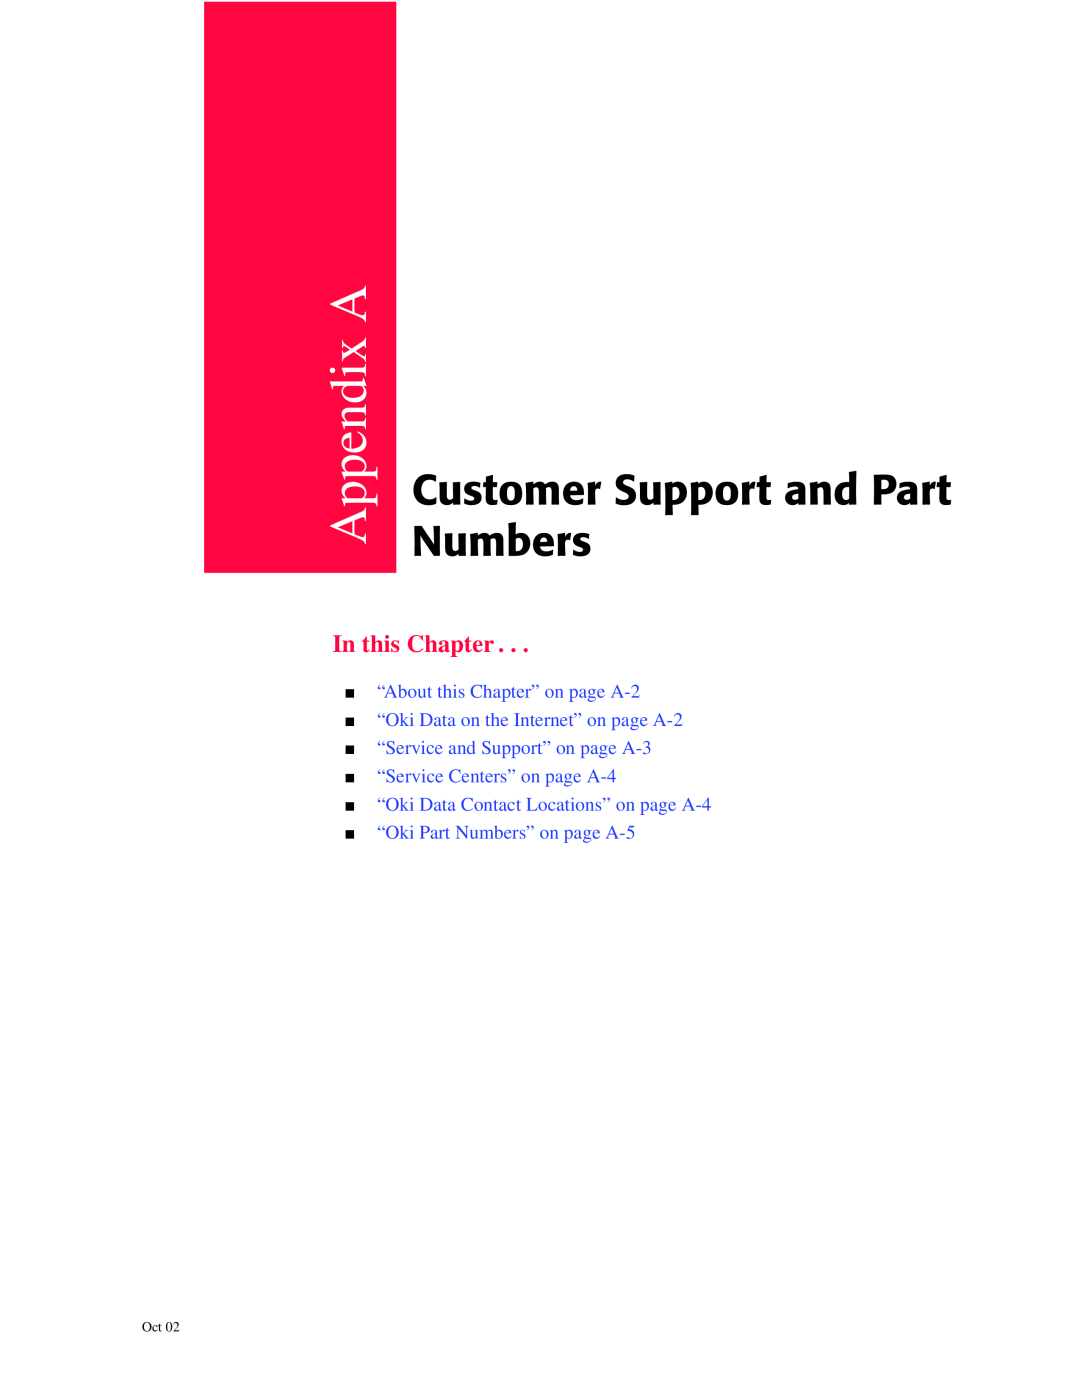 Oki 6100 manual Appendix A, Customer Support and Part Numbers, In this Chapter, “About this Chapter” on page A-2 